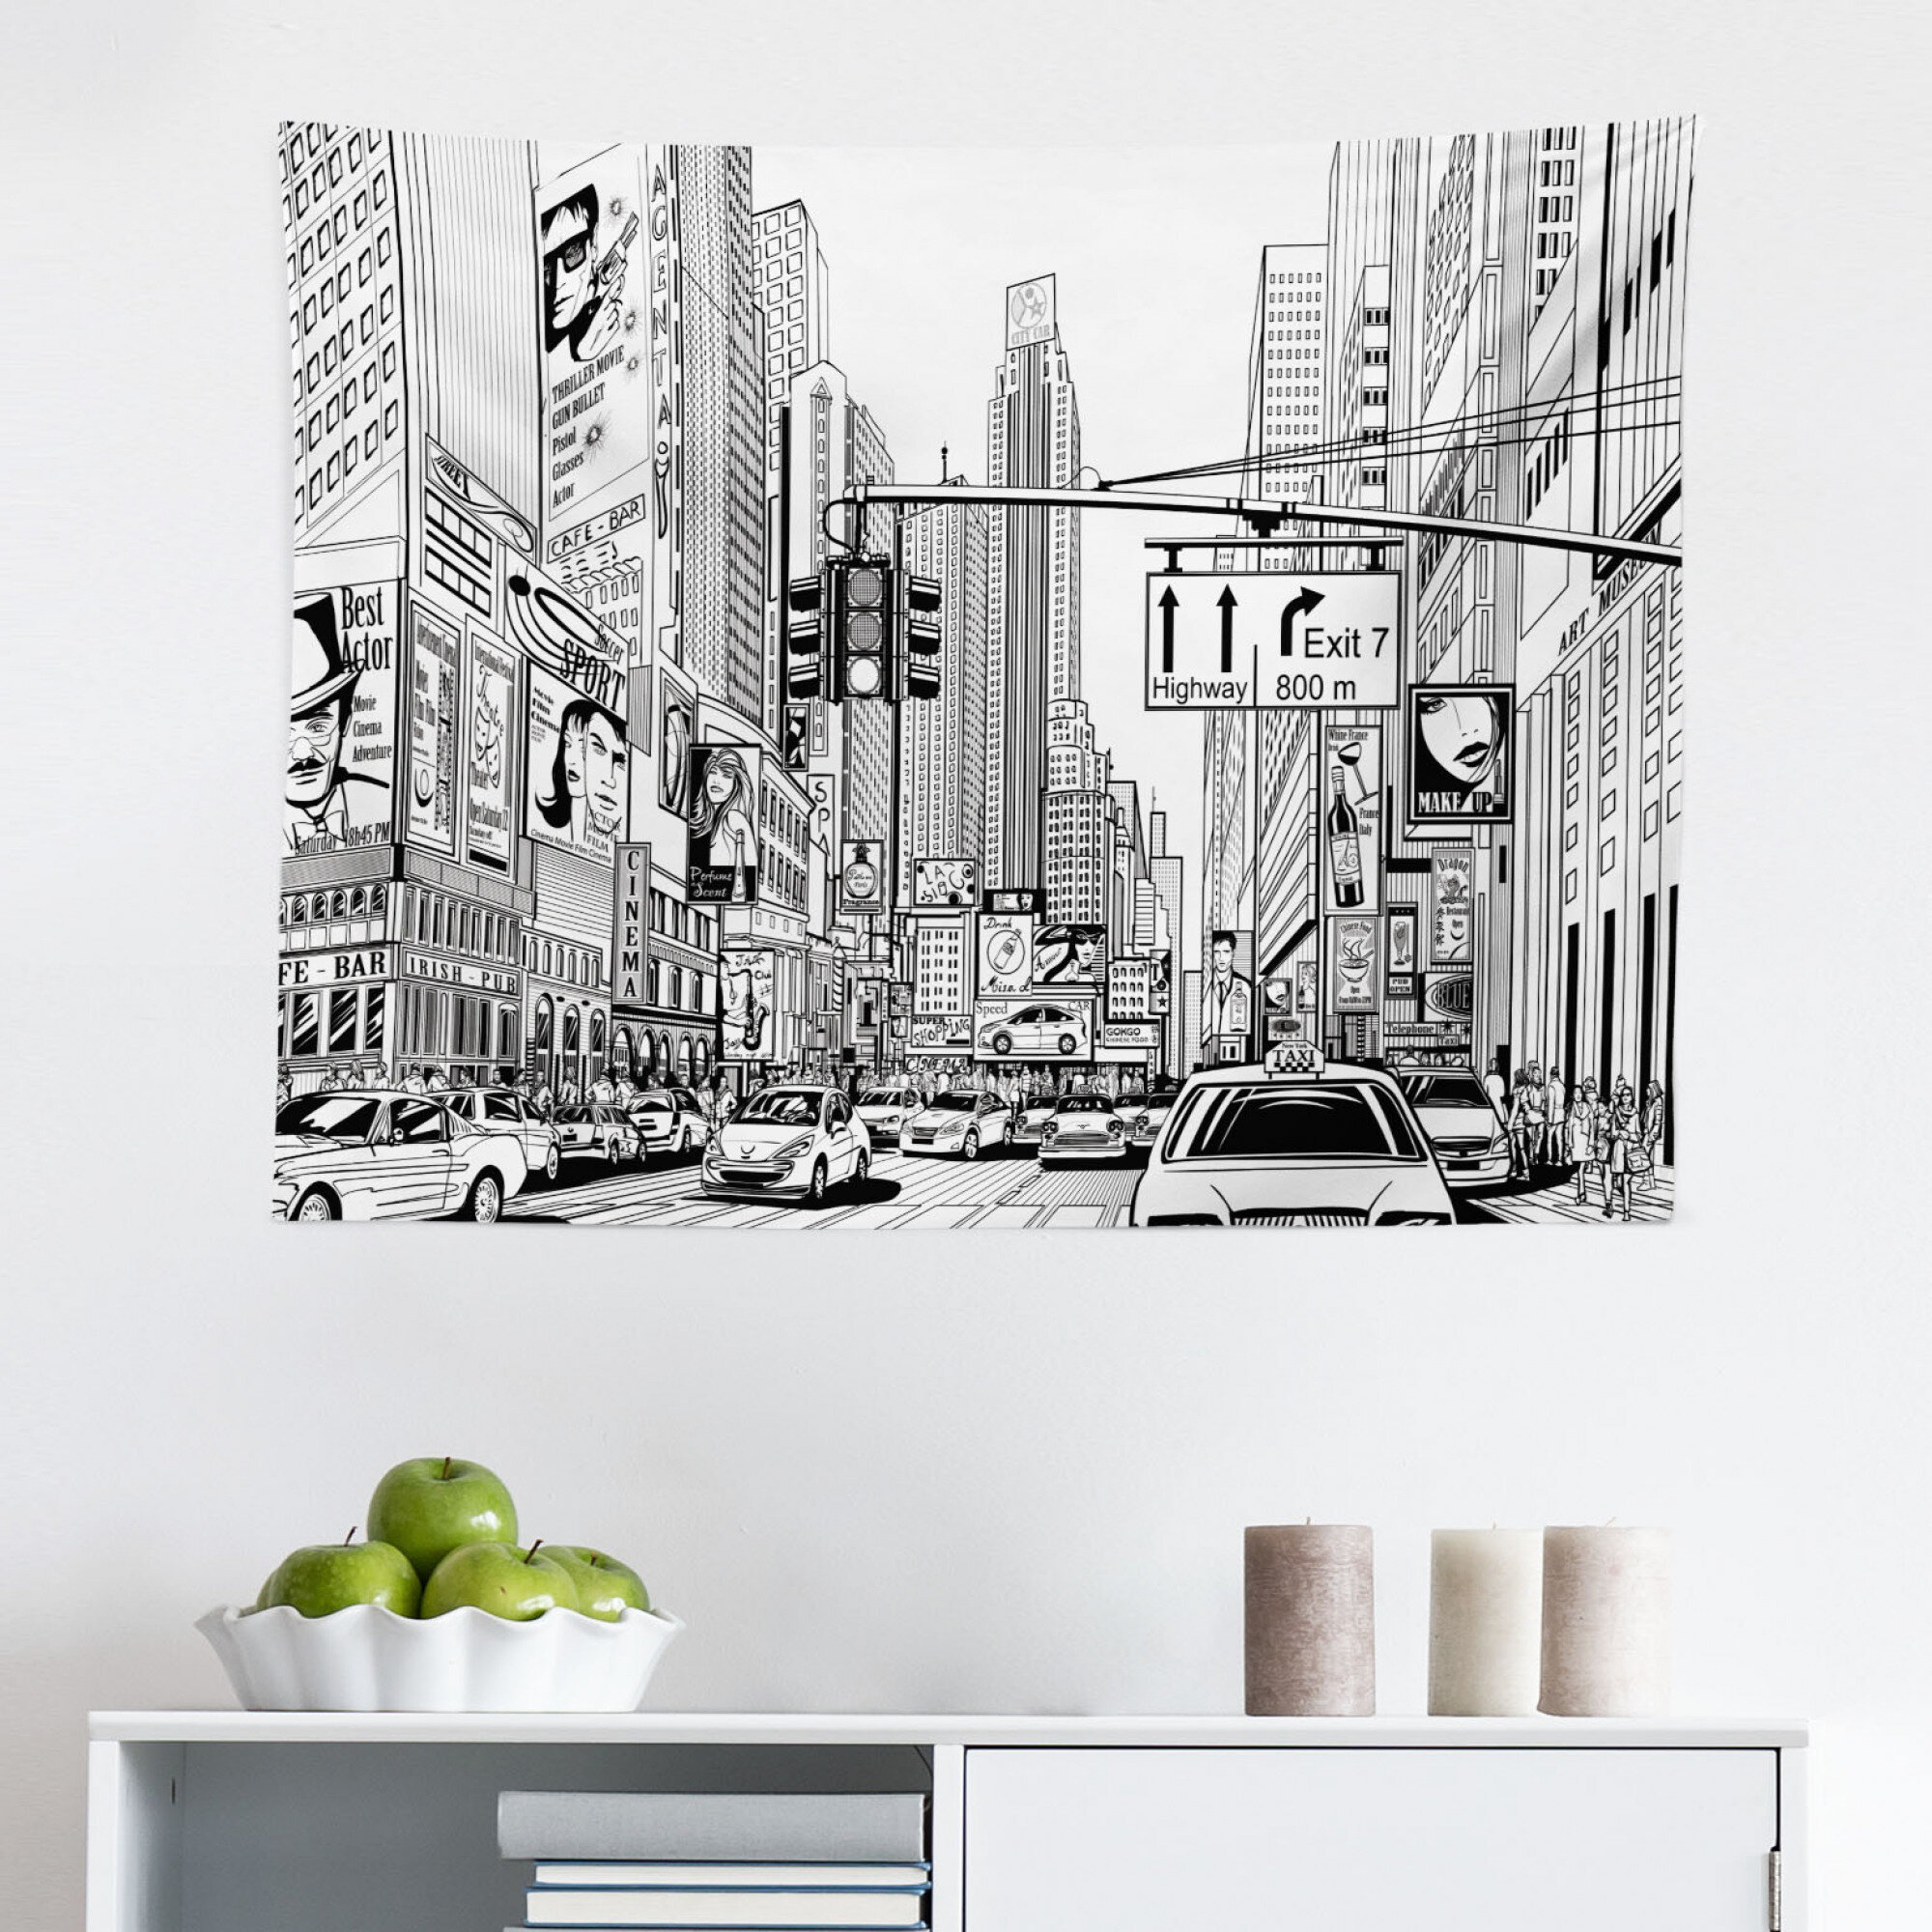 REFRED Draw Las Vegas Skyline Big City Architecture Vintage Engraved Wall  Art Hanging Tapestry Home Decor for Living Room Bedroom Dorm 60x80 inch 